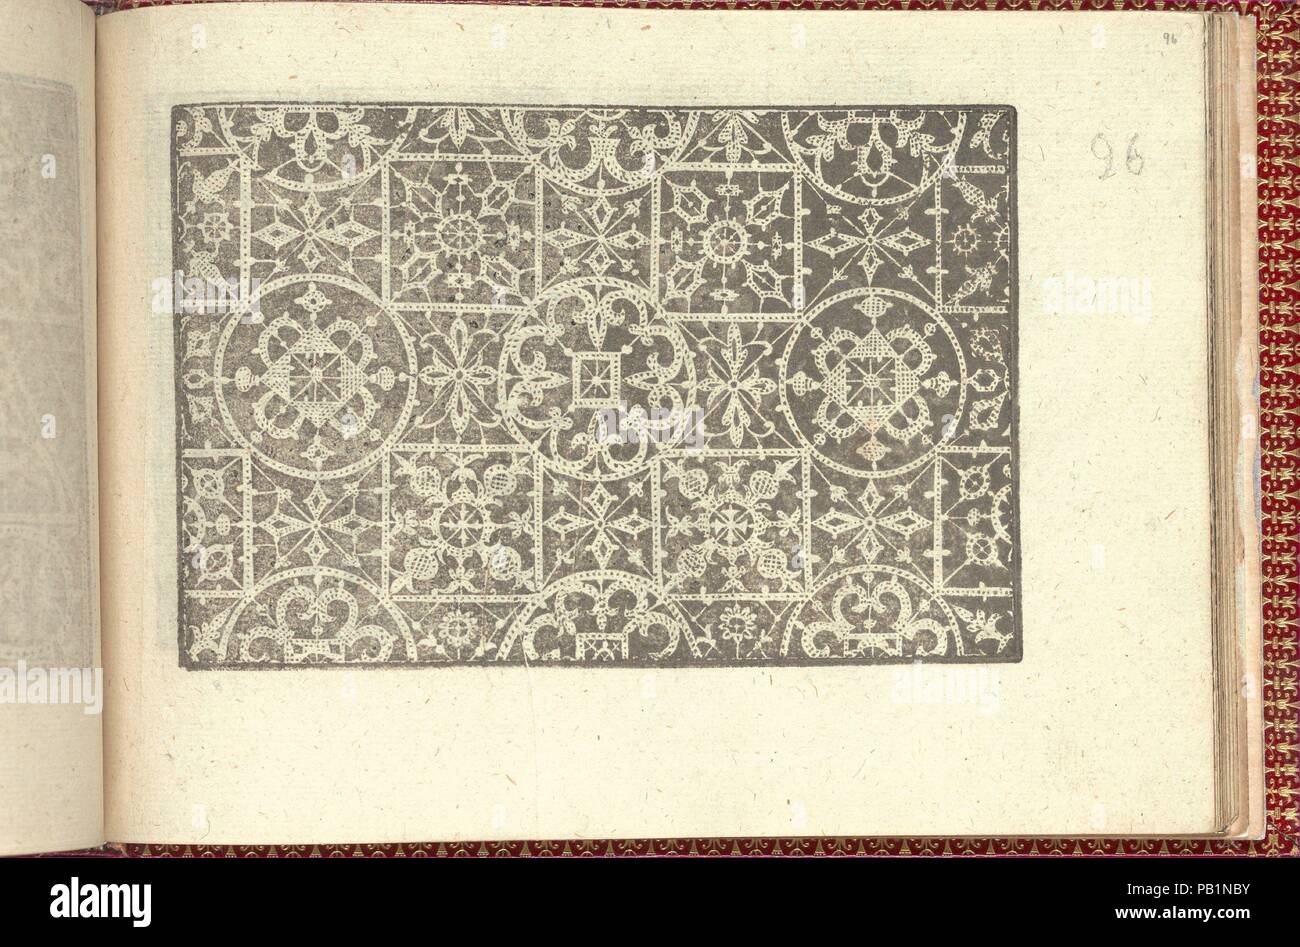 Corona delle Nobili et Virtuose Donne: Libro I-IV, page 96 (recto). Dimensions: Overall: 5 1/2 x 7 11/16 in. (14 x 19.5 cm). Published in: Venice. Publisher: Cesare Vecellio (Italian, Pieve di Cadore 1521-1601 Venice) , Venice. Date: 1601.  Published by Cesare Vecellio, Italian, Pieve di Cadore 1521-1601 Venice, Venice.  From top to bottom, and left to right:  Design is decorated with a pattern of squares and circles that are ornamented with different 4-petaled flowers. Museum: Metropolitan Museum of Art, New York, USA. Stock Photo